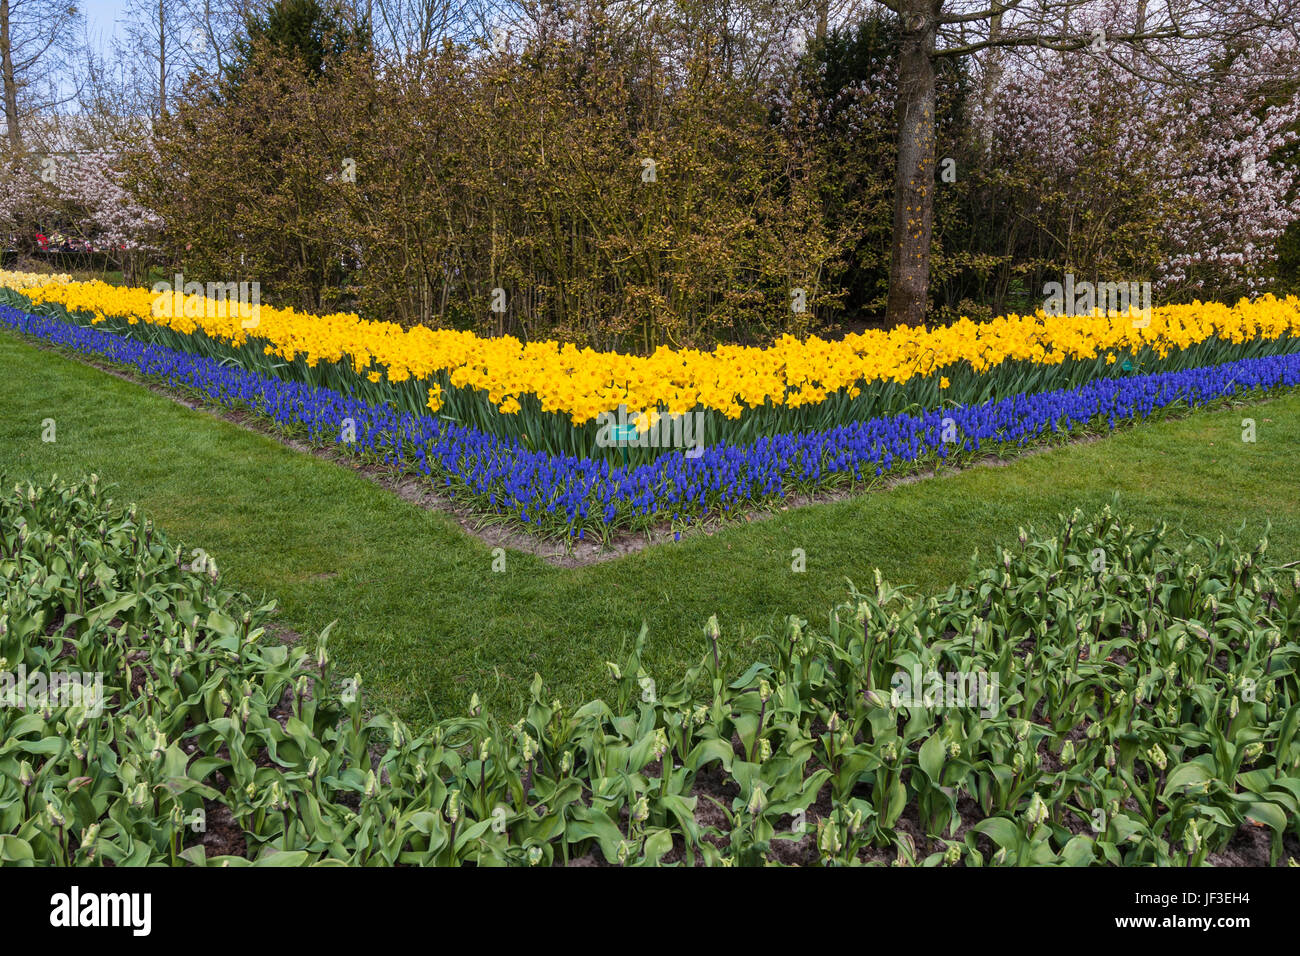 Daffodils, Narcissus 'MARCKE', and Muscari at Keukenhof Gardens in The Netherlands. (Holland). Stock Photo